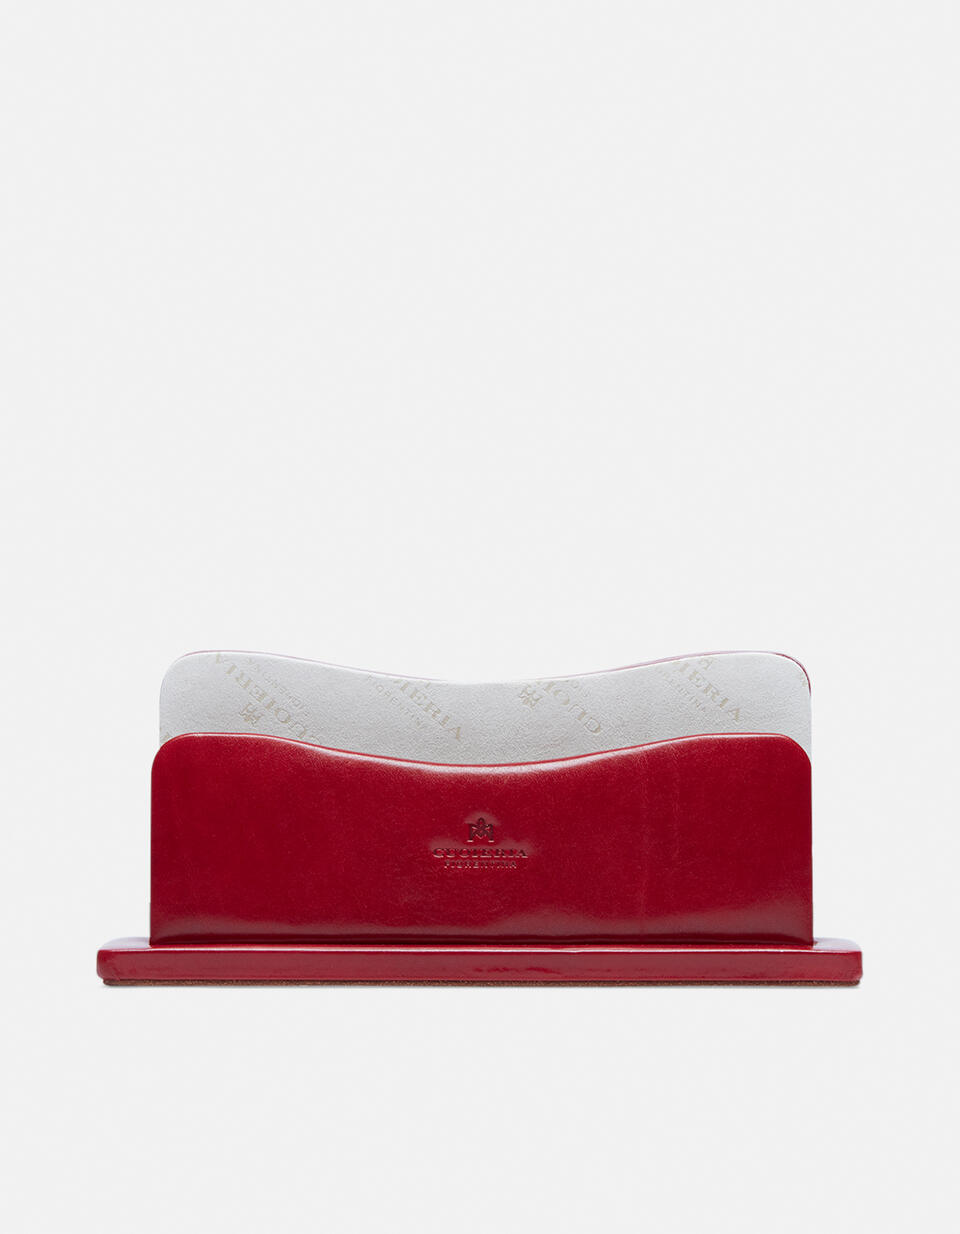 Leather letter holder Red  - Cuoieria Fiorentina